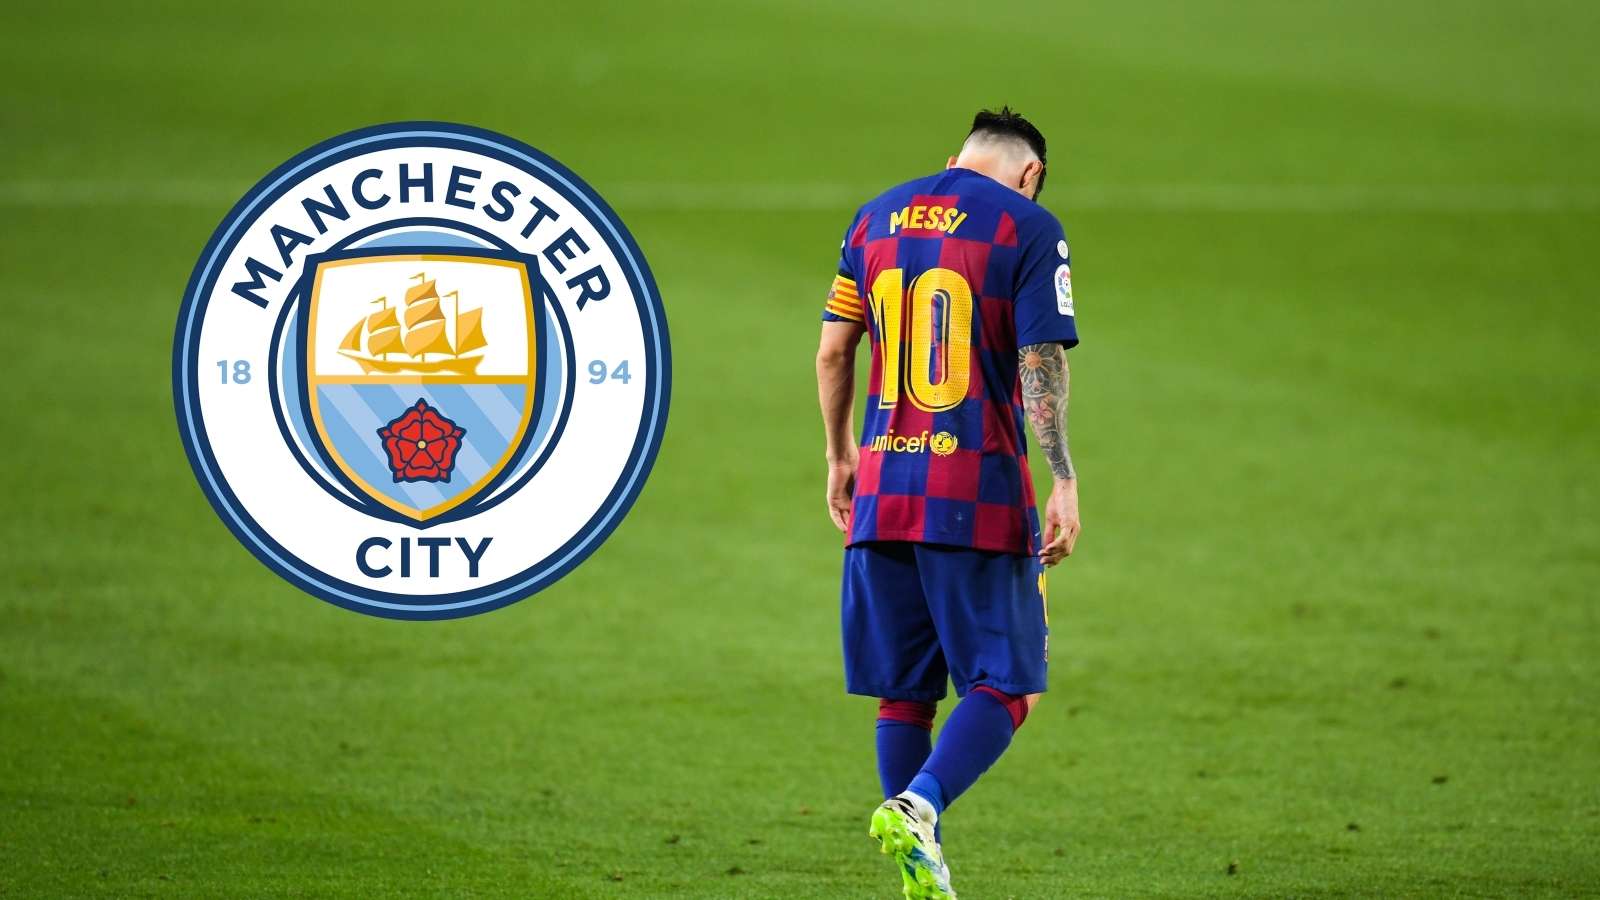 Messi Manchester city